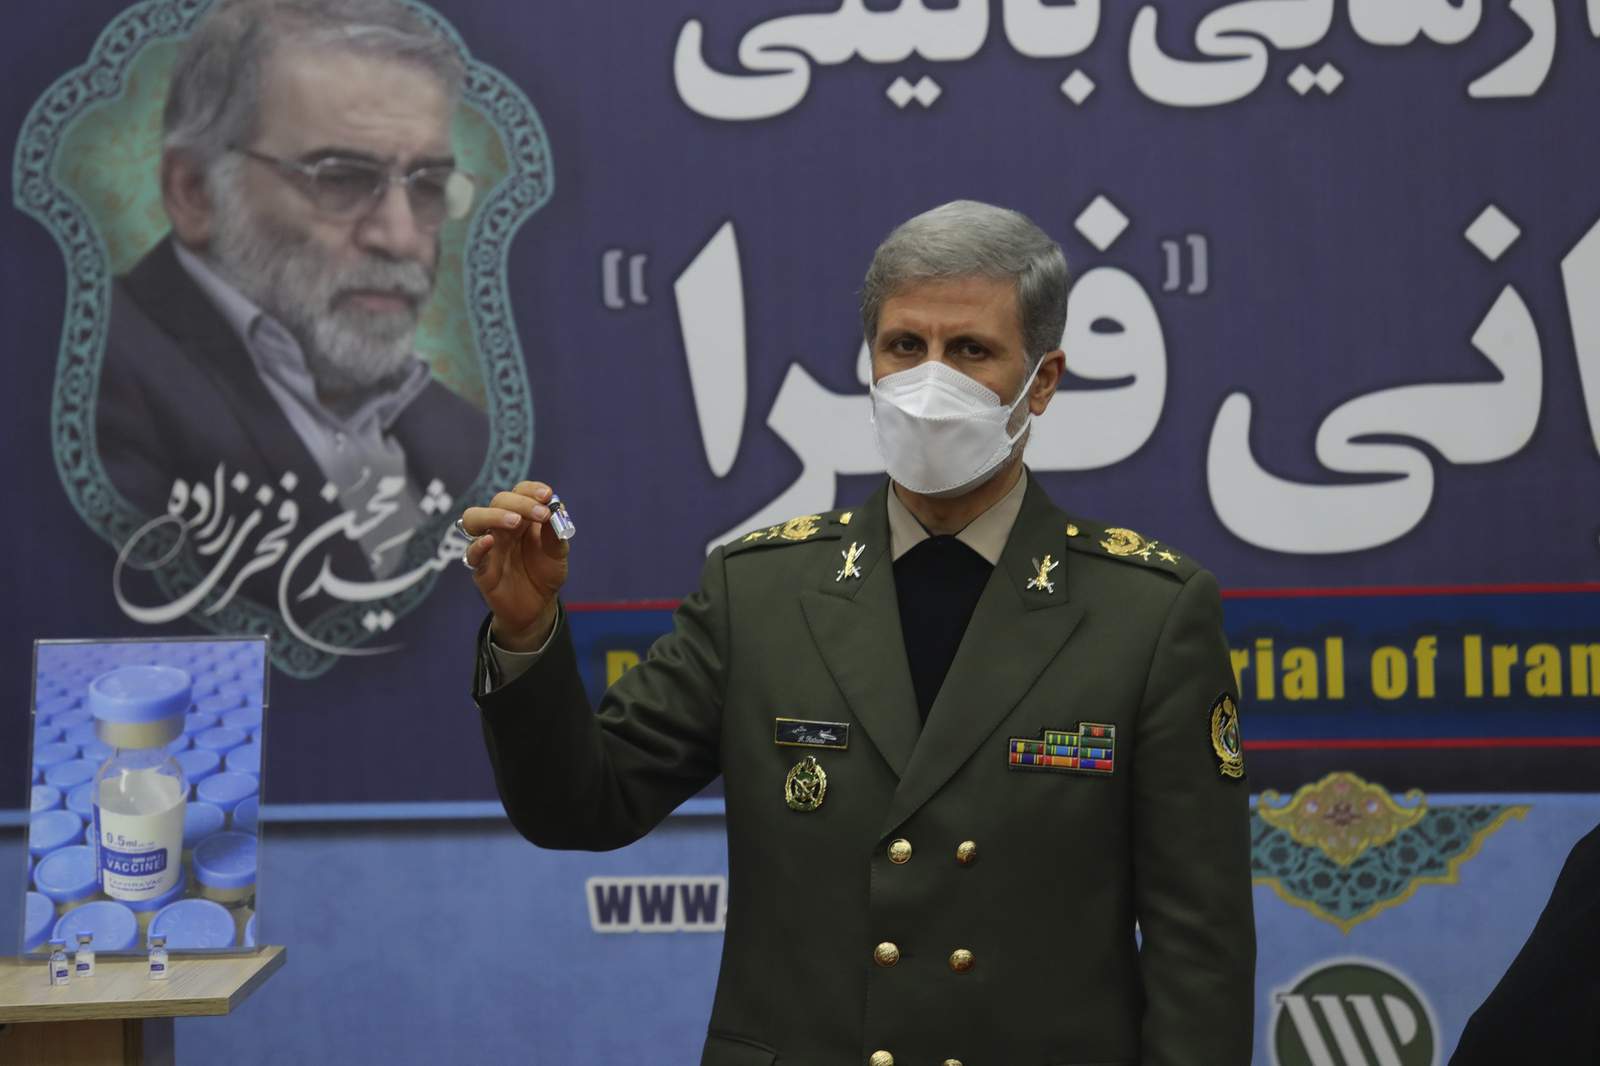 Iran starts trial of new homegrown vaccine as campaign lags